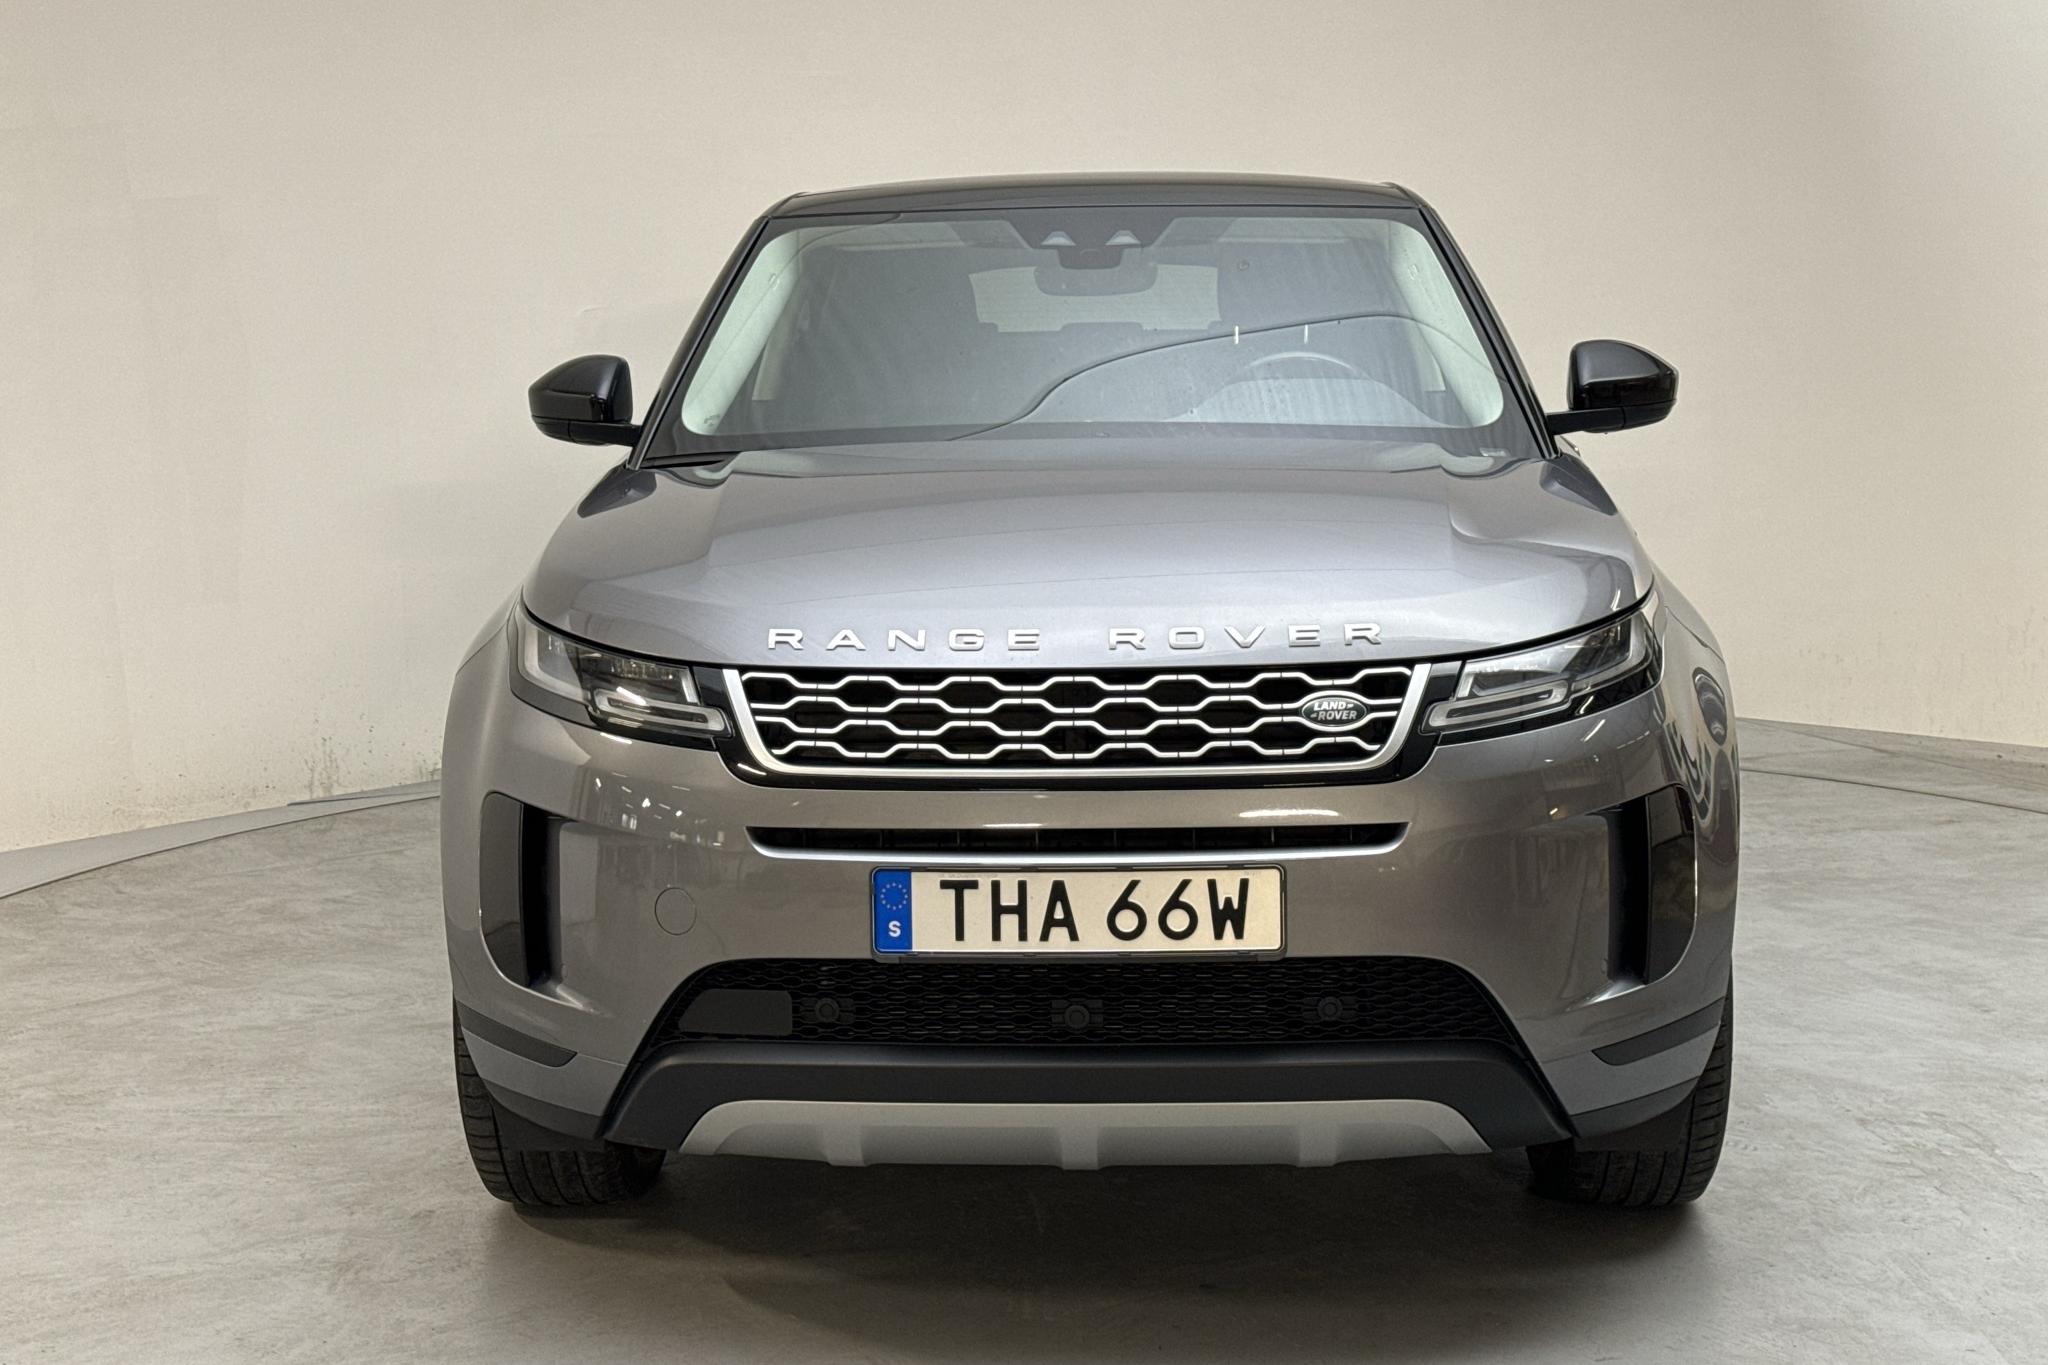 Land Rover Range Rover Evoque 2.0 D180 AWD 5dr (180hk) - 96 600 km - Automatic - gray - 2020